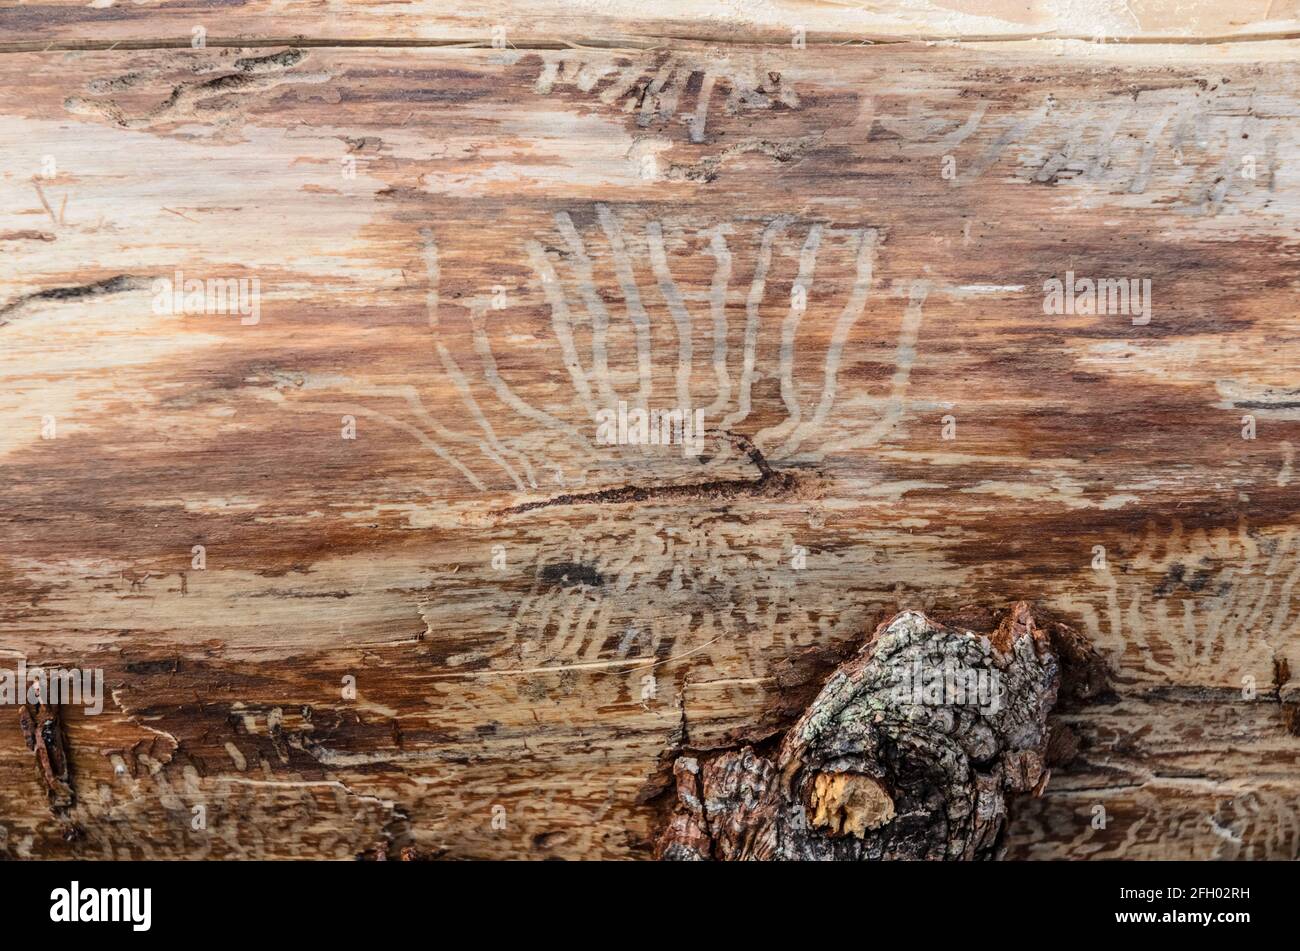 Wooden natural background of a felled tree trunk and feeding galleries, pest infested by bark beetle (Scolytinae), close-up view Stock Photo